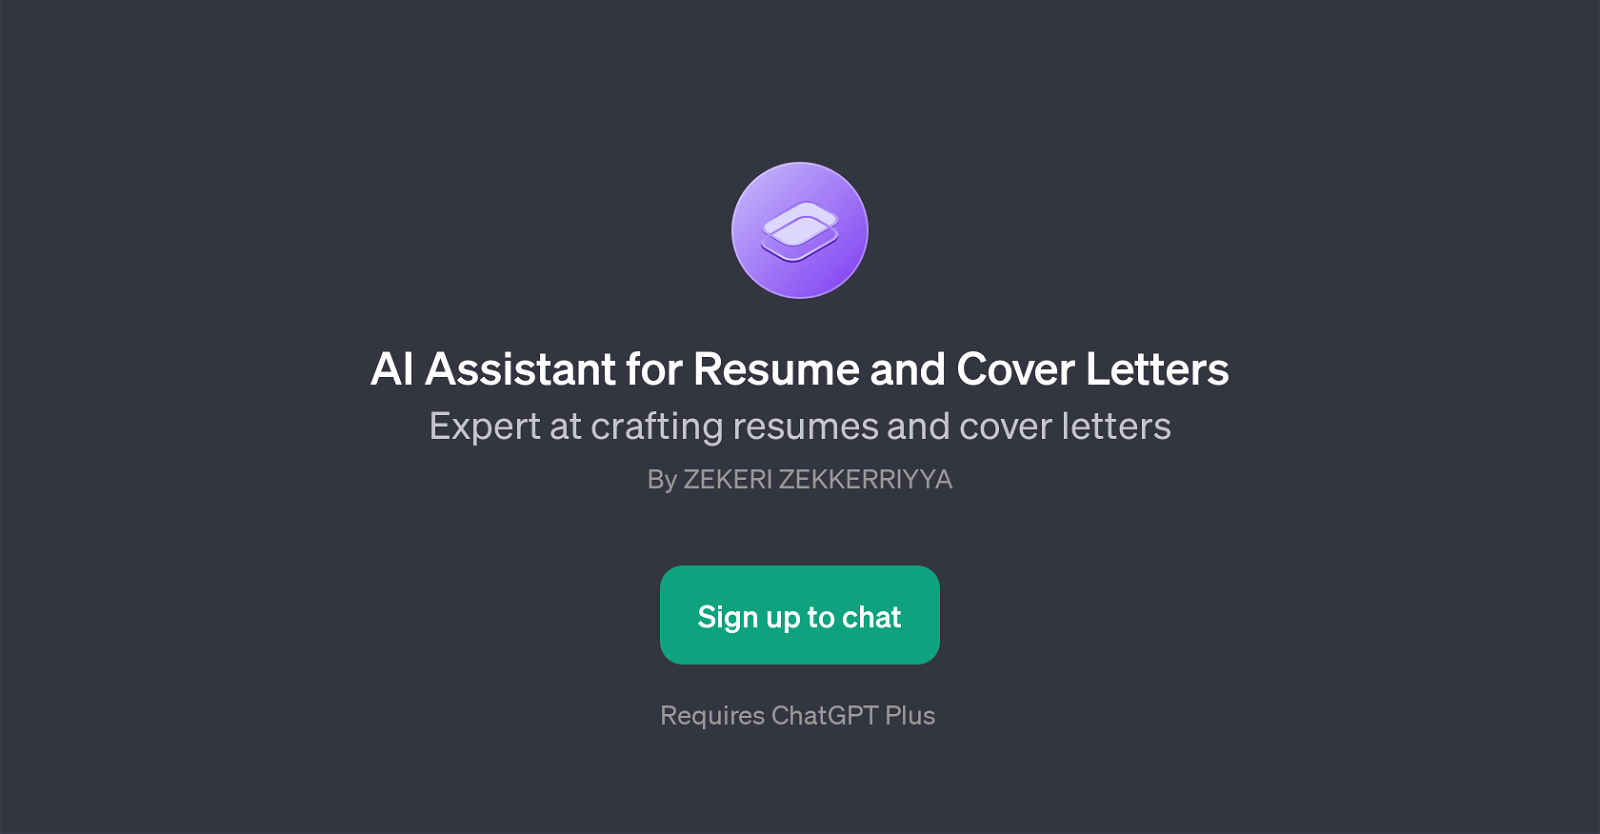 AI Assistant for Resume and Cover Letters website